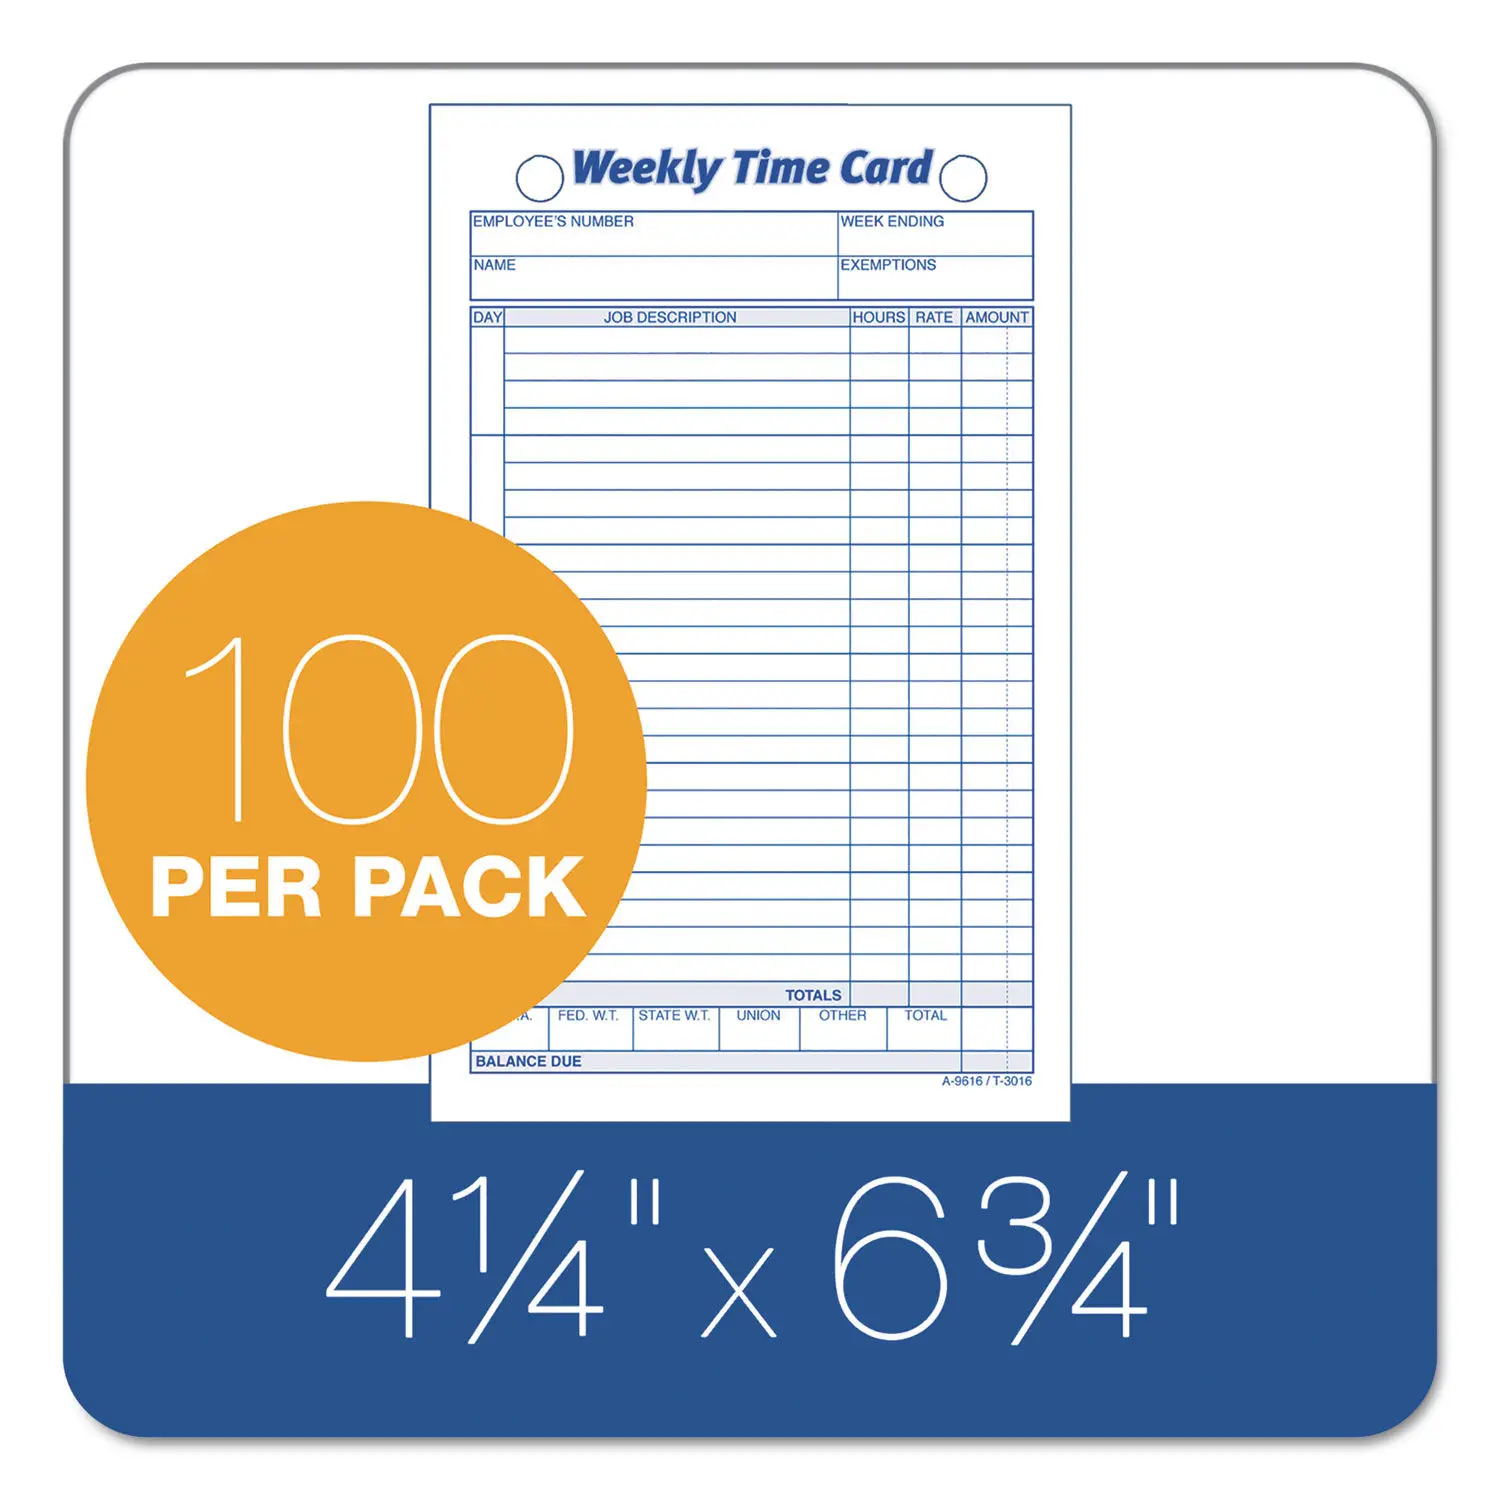 Employee Time Card by TOPSâ¢ TOP3016